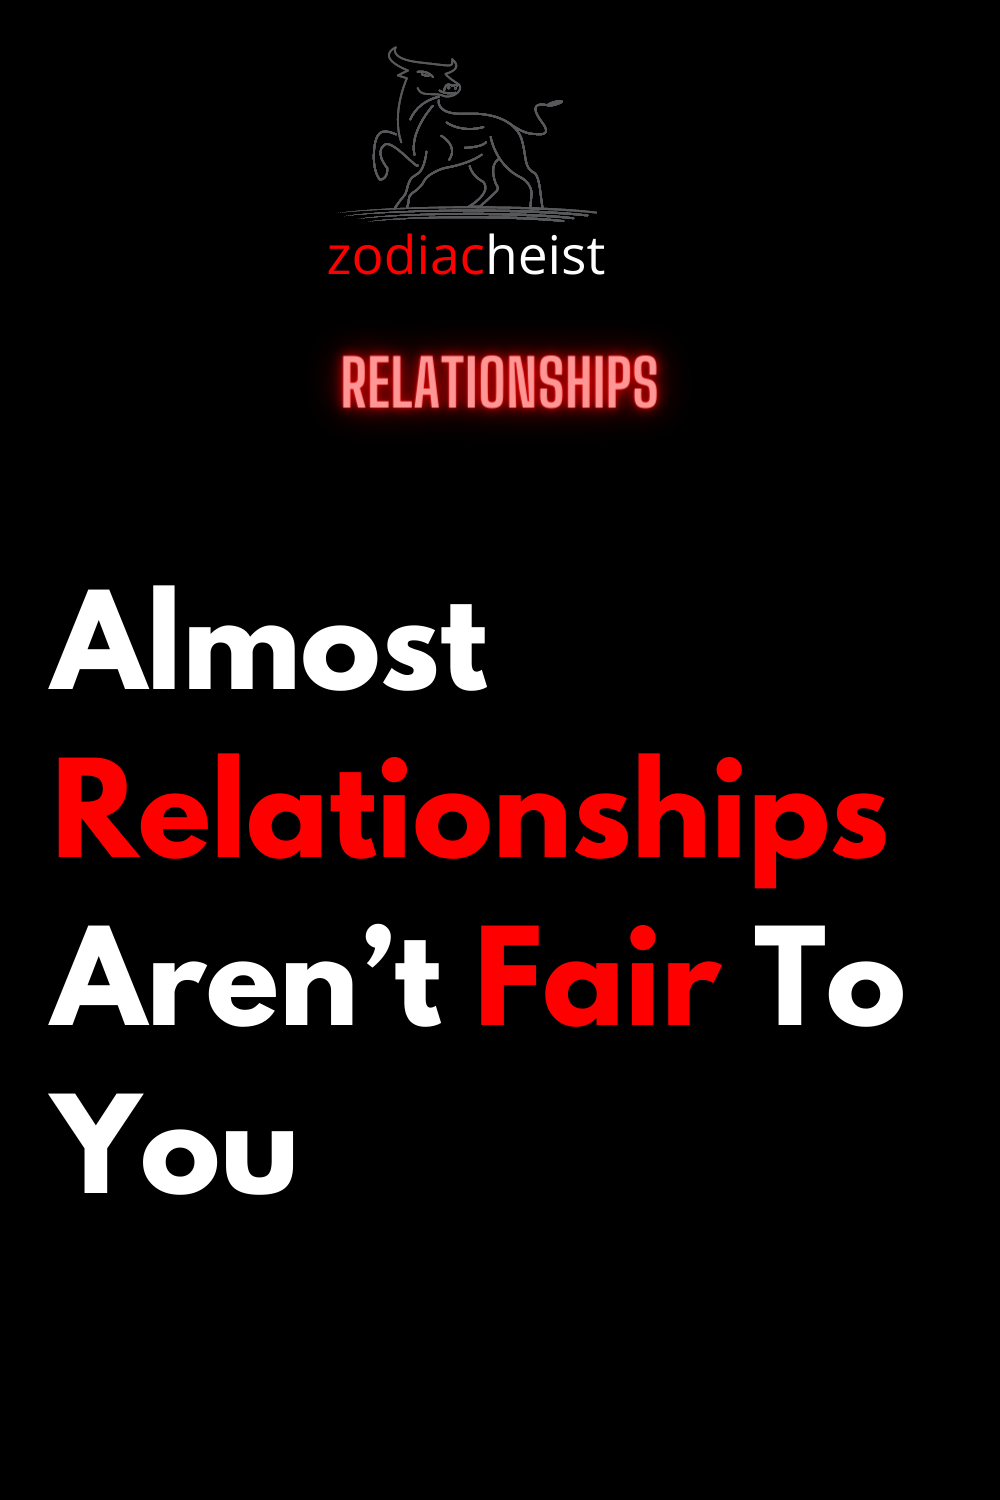 Almost Relationships Aren’t Fair To You